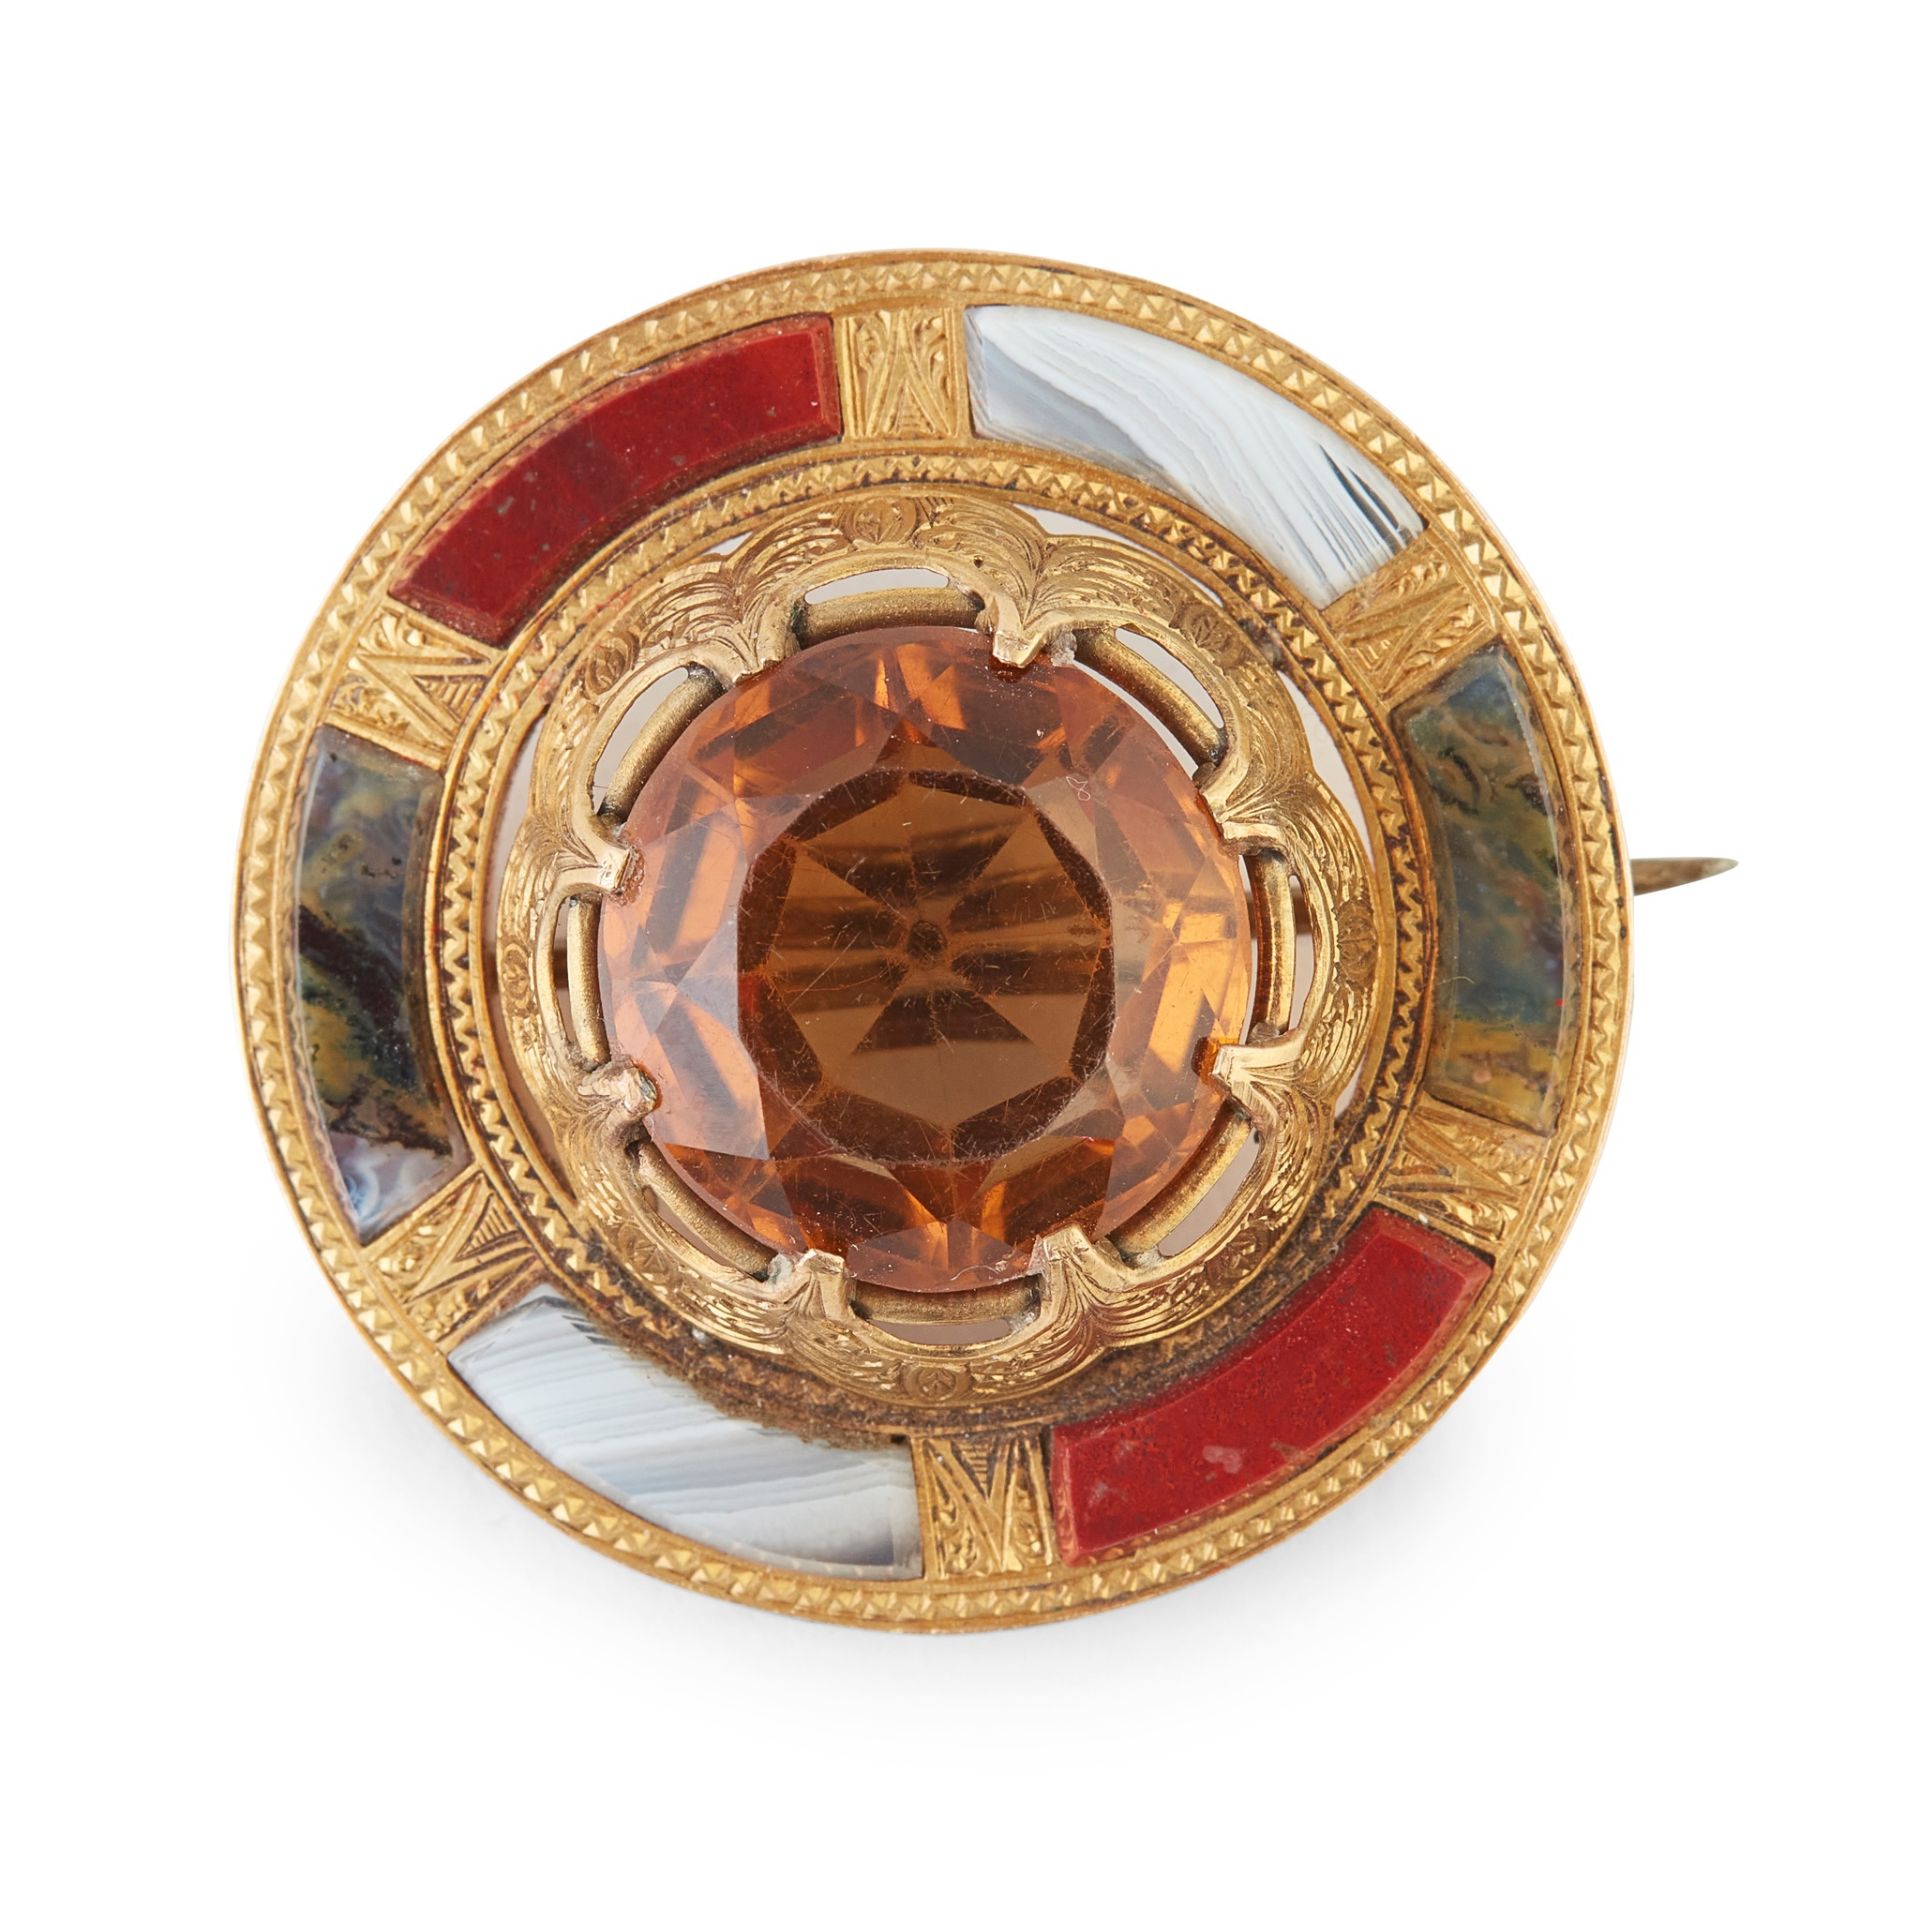 A CITRINE AND AGATE SET BROOCH